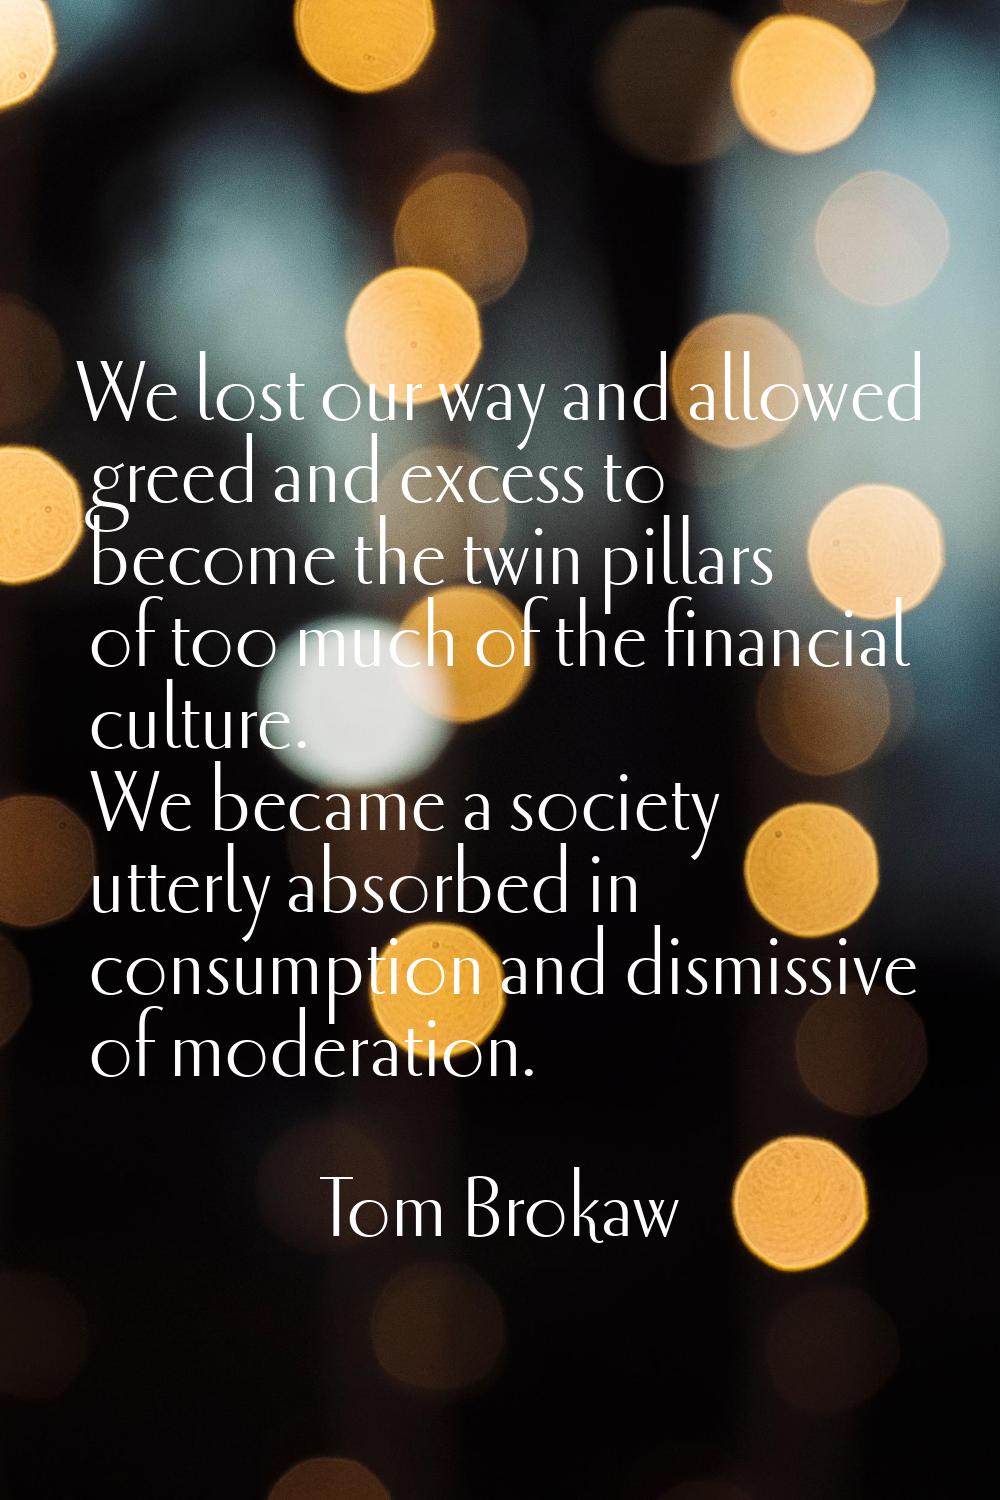 We lost our way and allowed greed and excess to become the twin pillars of too much of the financia